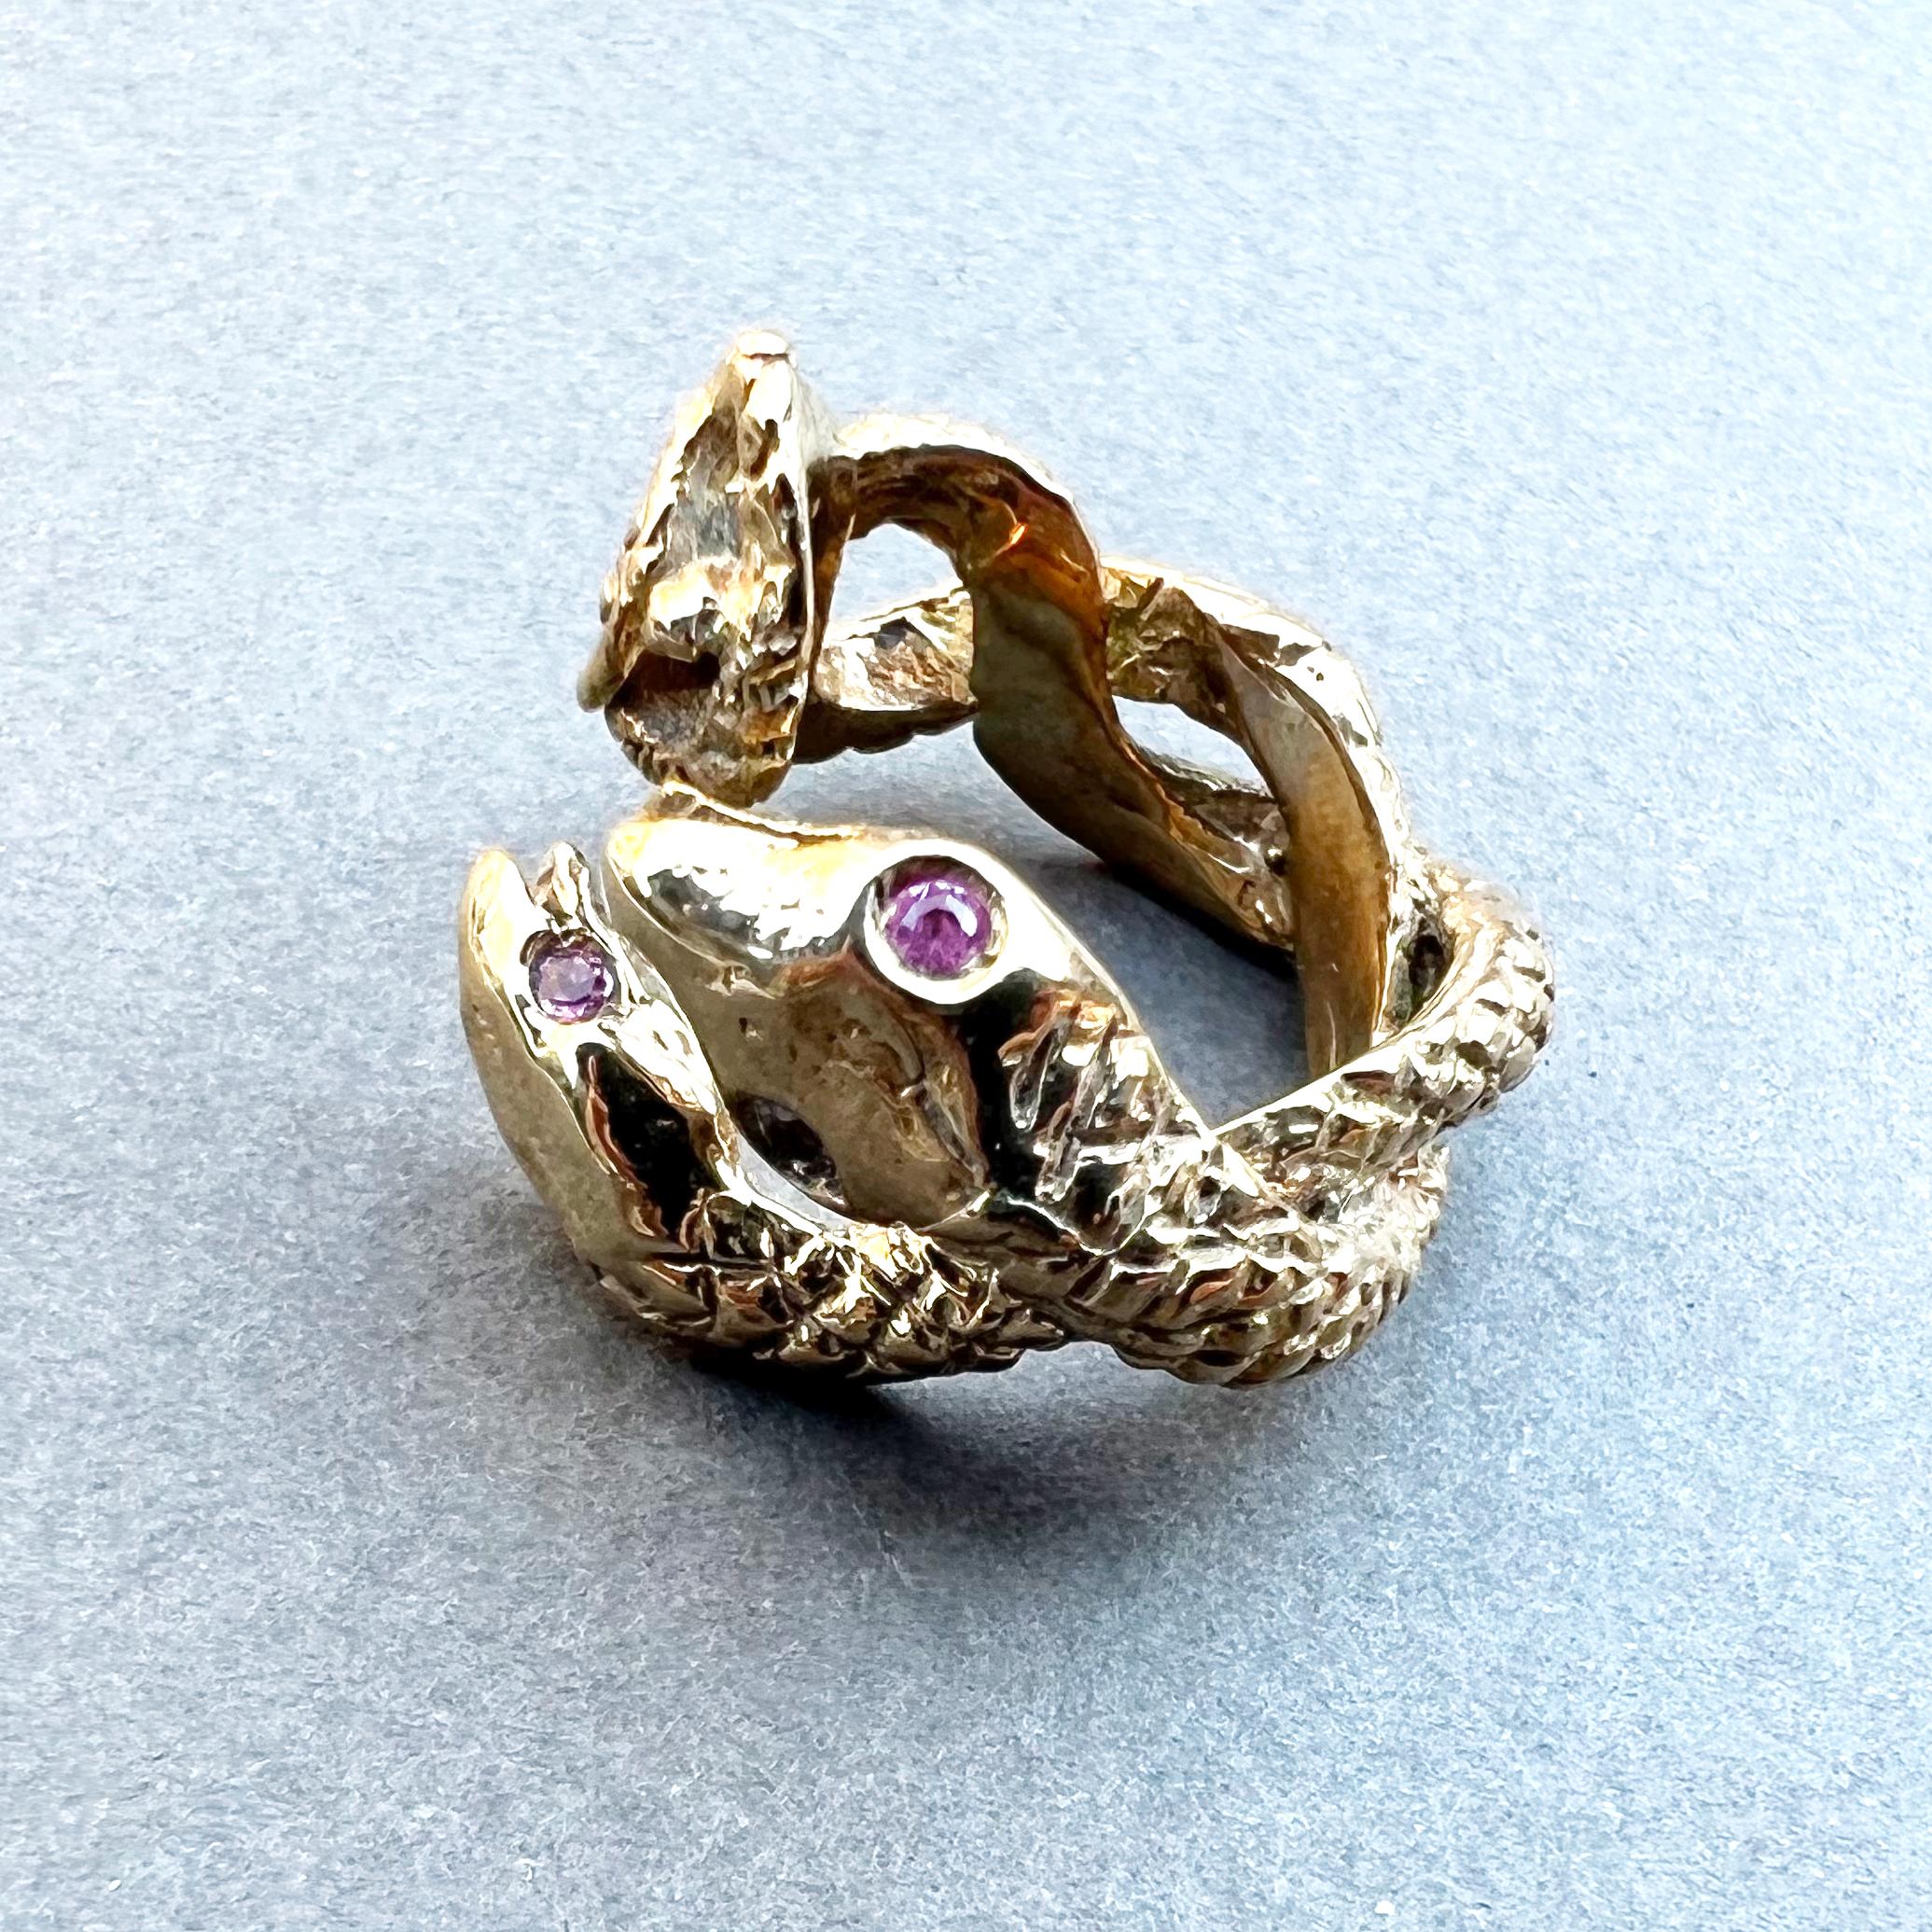 Women's Animal Jewelry Pink Sapphire Snake Ring Bronze Cocktail Ring J Dauphin For Sale